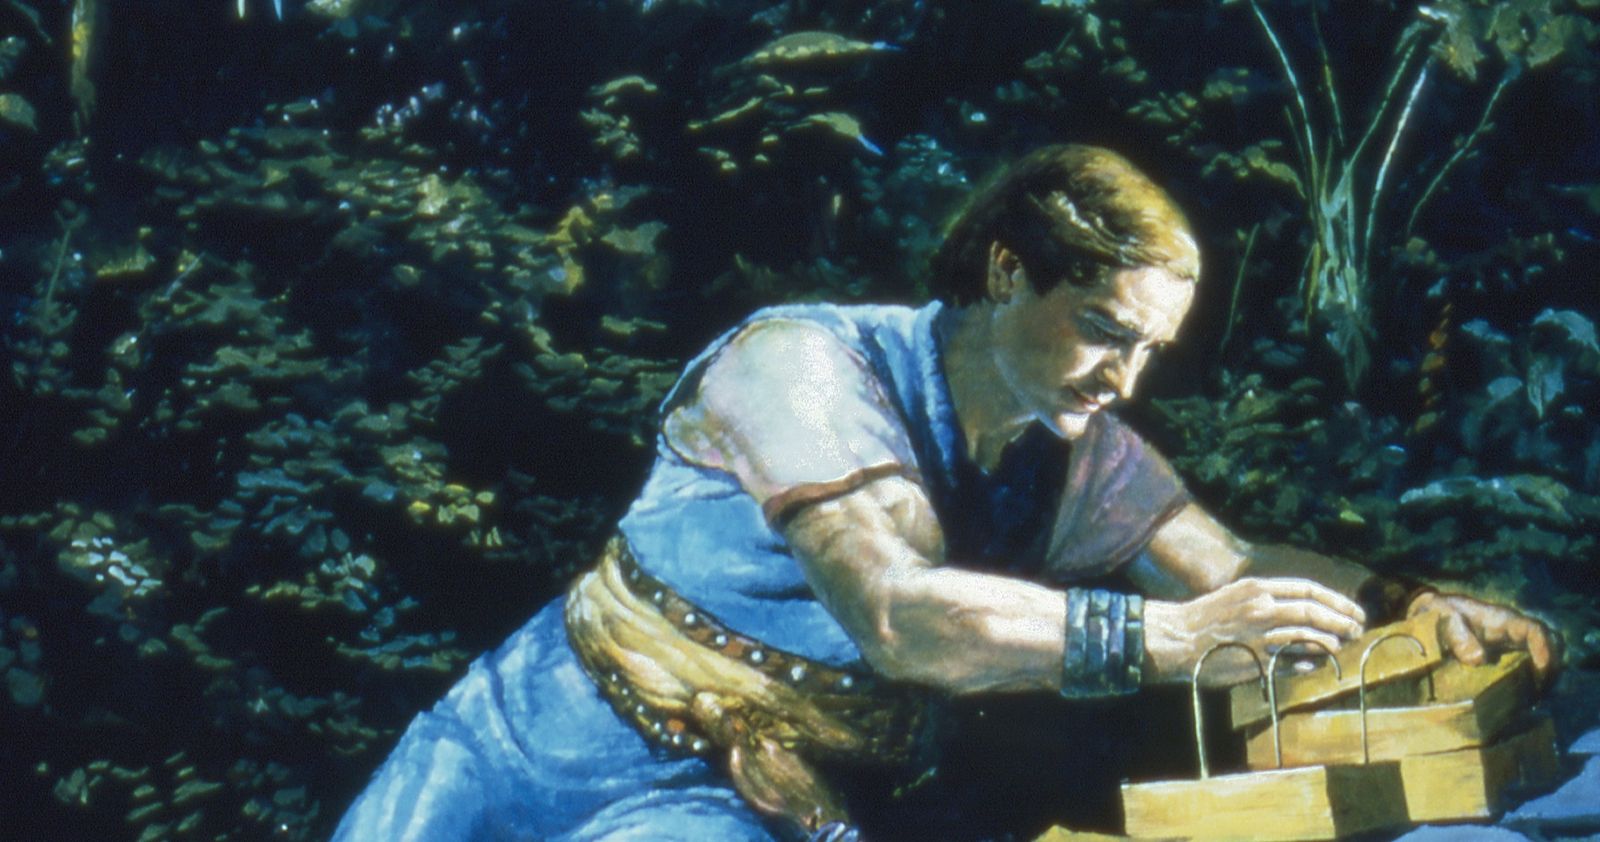 Moroni (Book of Mormon figure) is depicted reclining on a large rock and holding the golden plates. A sword and shield are leaning against the rock at Moroni's feet.